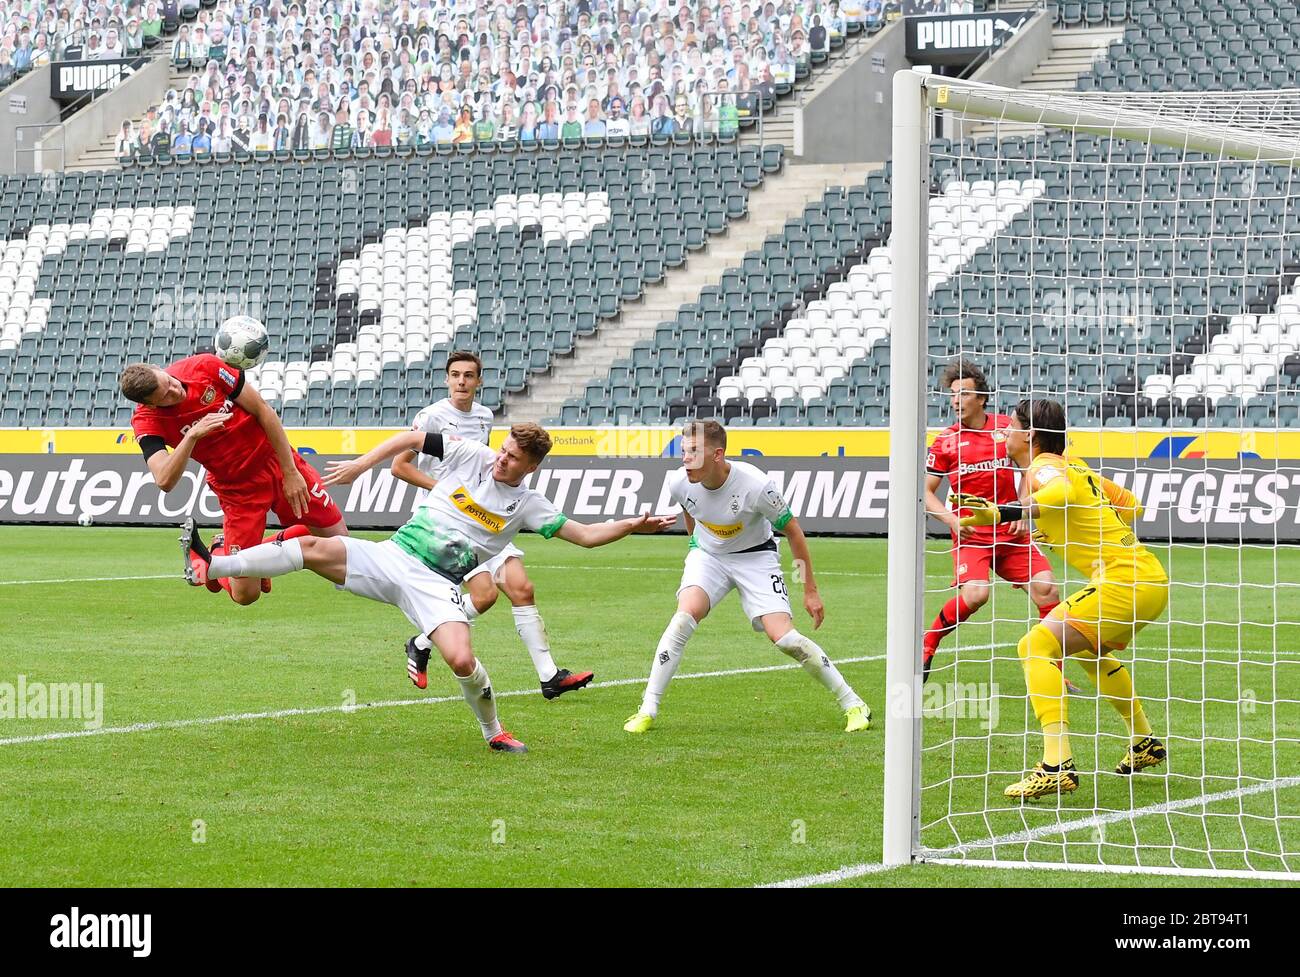 Borussia Park Moenchengladbach Germany, Football: German Bundesliga matchday 27, Borussia Moenchengladbach (BMG, white) vs Bayer 04 Leverkusen (B04, red) 1:3 — header goal for the 1:3 by Sven Bender (Leverkusen) against Nico Elvedi (BMG), Matthias Ginter (BMG) and   Yann Sommer (BMG)  . Because of the Corona virus pandemic all german league matches are played in empty stadiums without spectators.  Foto: Maik Hölter/team2sportphoto/Pool/via Kolvenbach  Only for editorial use!   DFL regulations prohibit any use of photographs as image sequences and/or quasi-video. Stock Photo